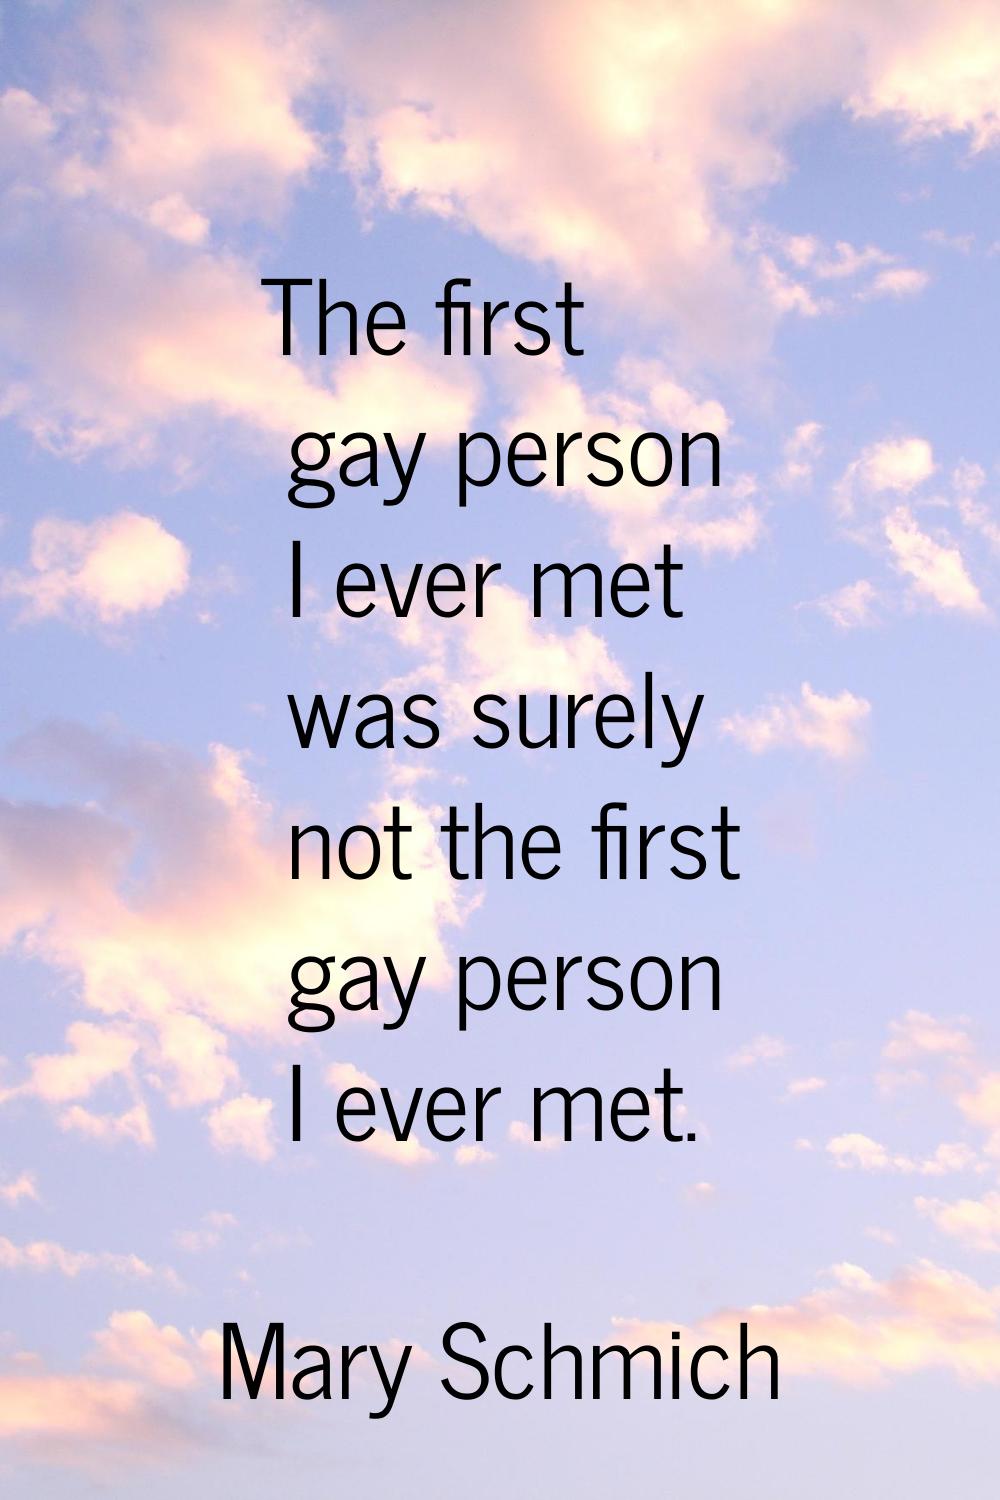 The first gay person I ever met was surely not the first gay person I ever met.